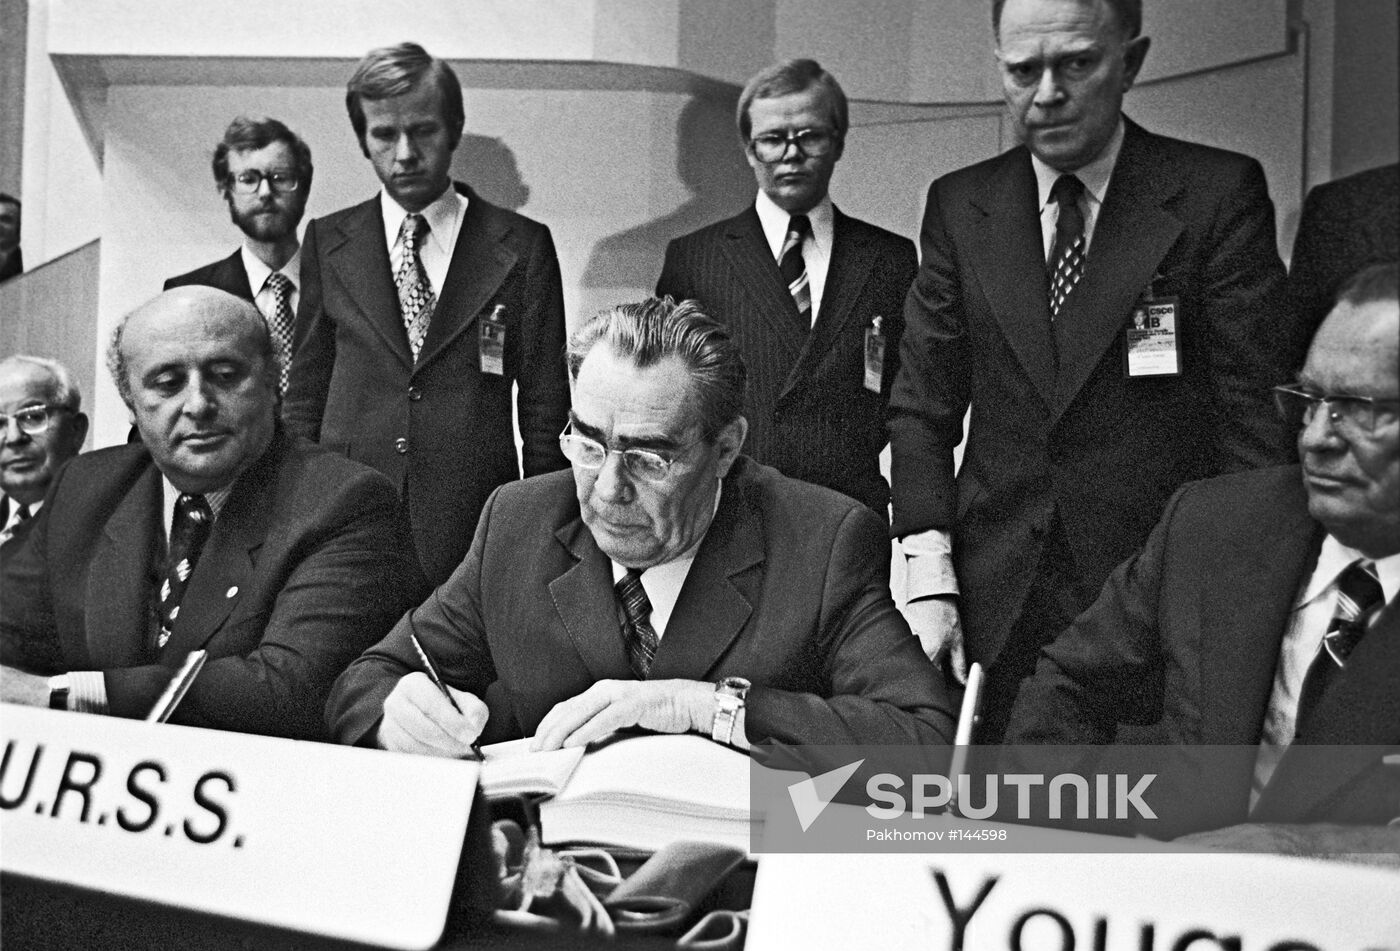 BREZHNEV COMMISION SECURITY IN EUROPE AGREEMENT SIGNING